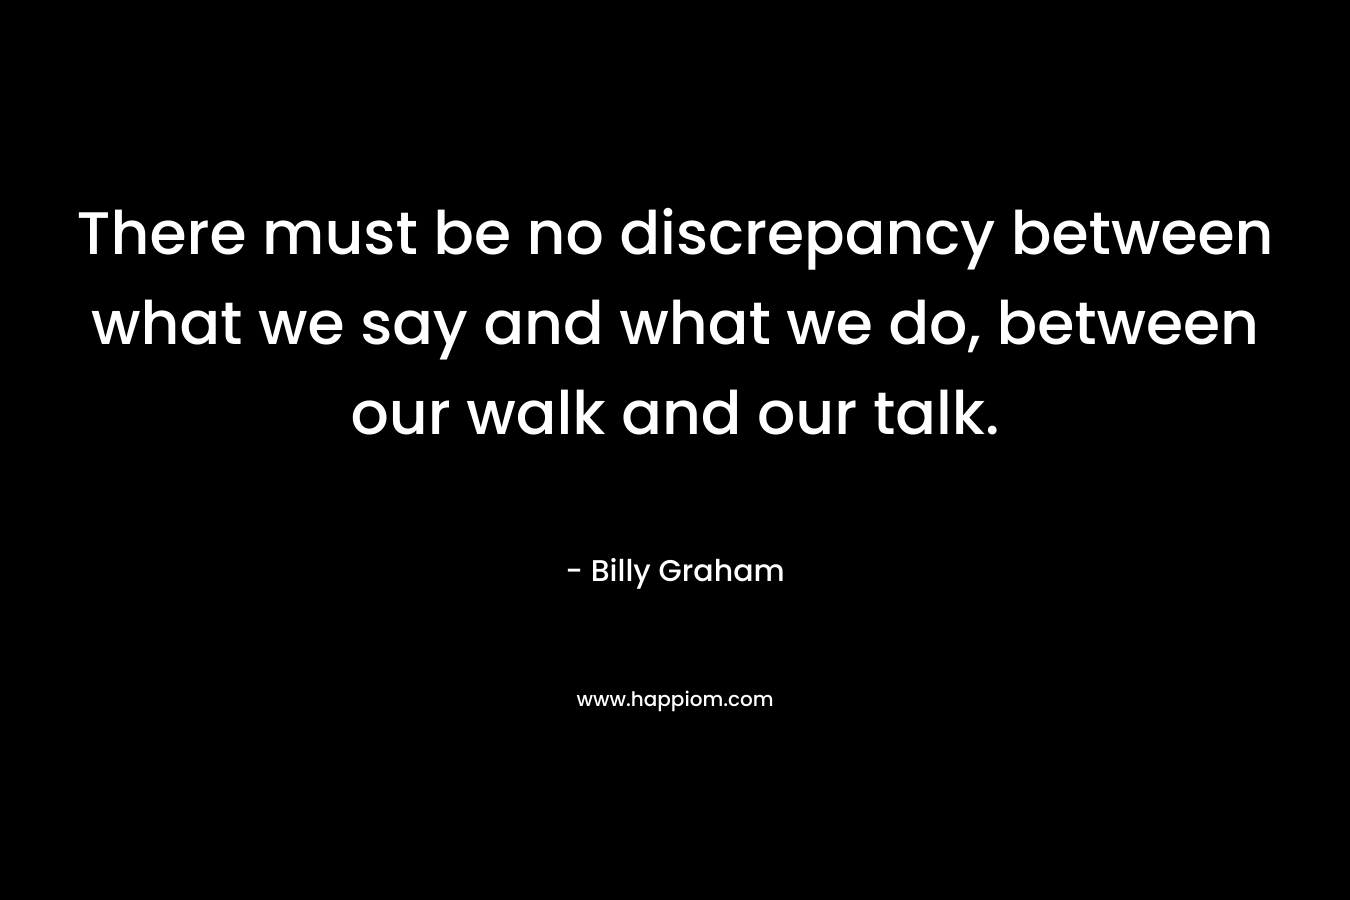 There must be no discrepancy between what we say and what we do, between our walk and our talk. – Billy Graham